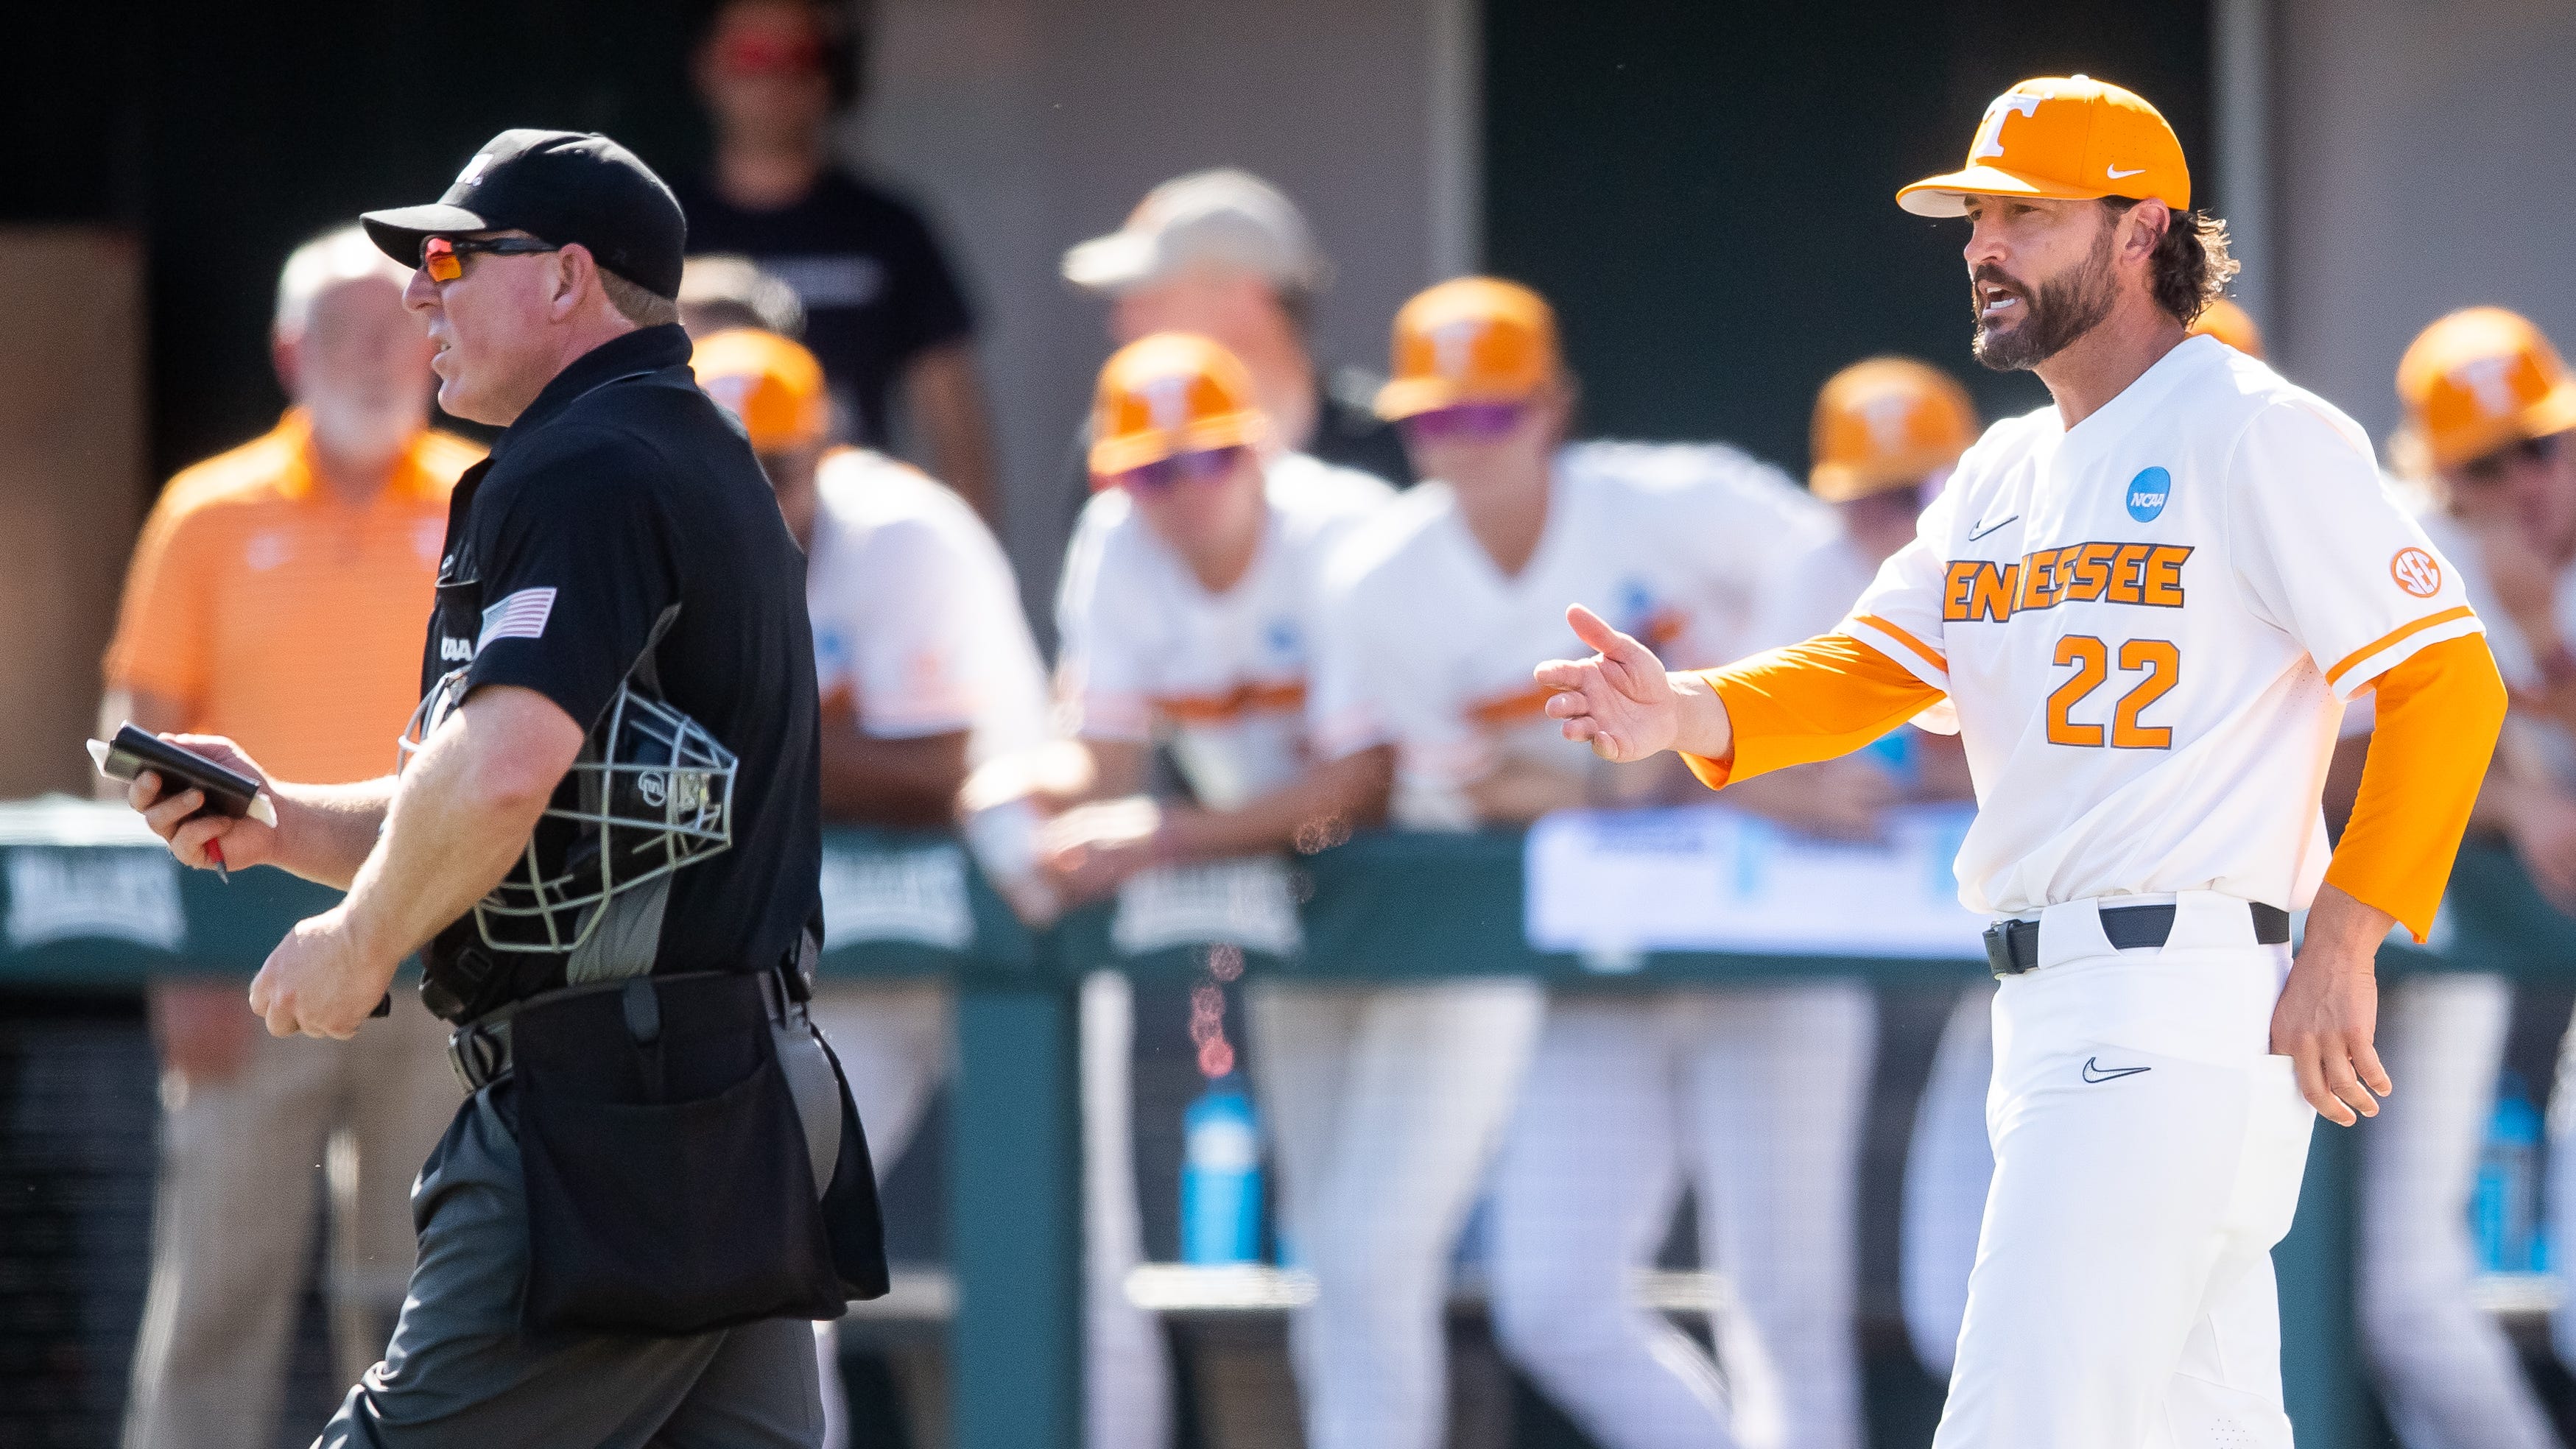 What is Tony Vitello's record in elimination games with Tennessee baseball?